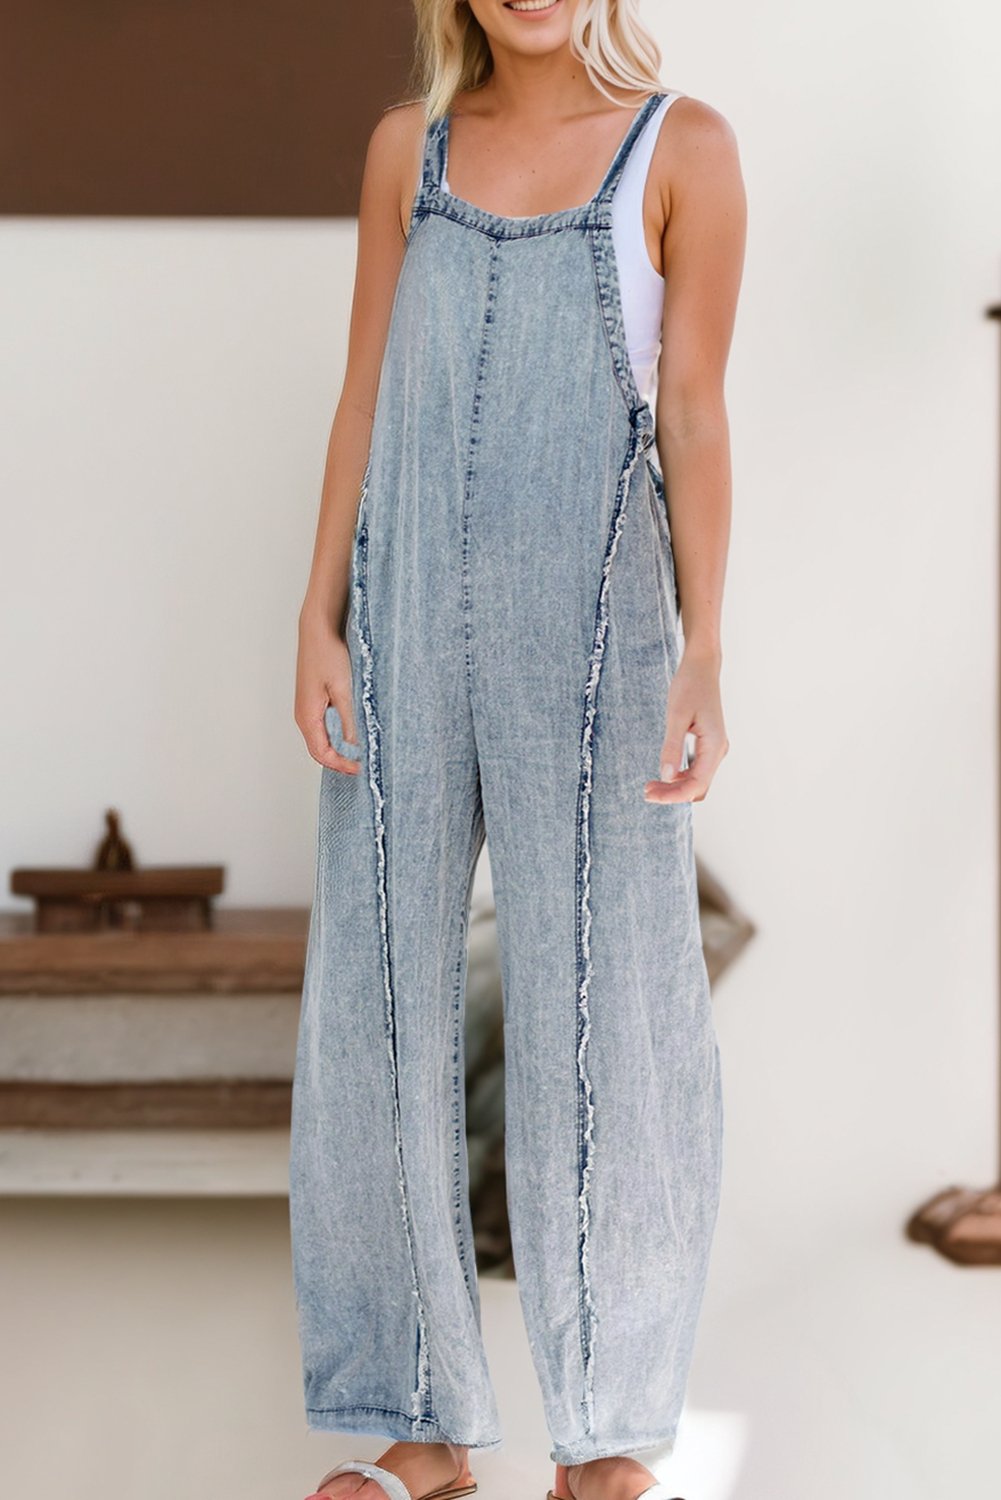 Dolly Denim Jumpsuit - Rise and Redemption